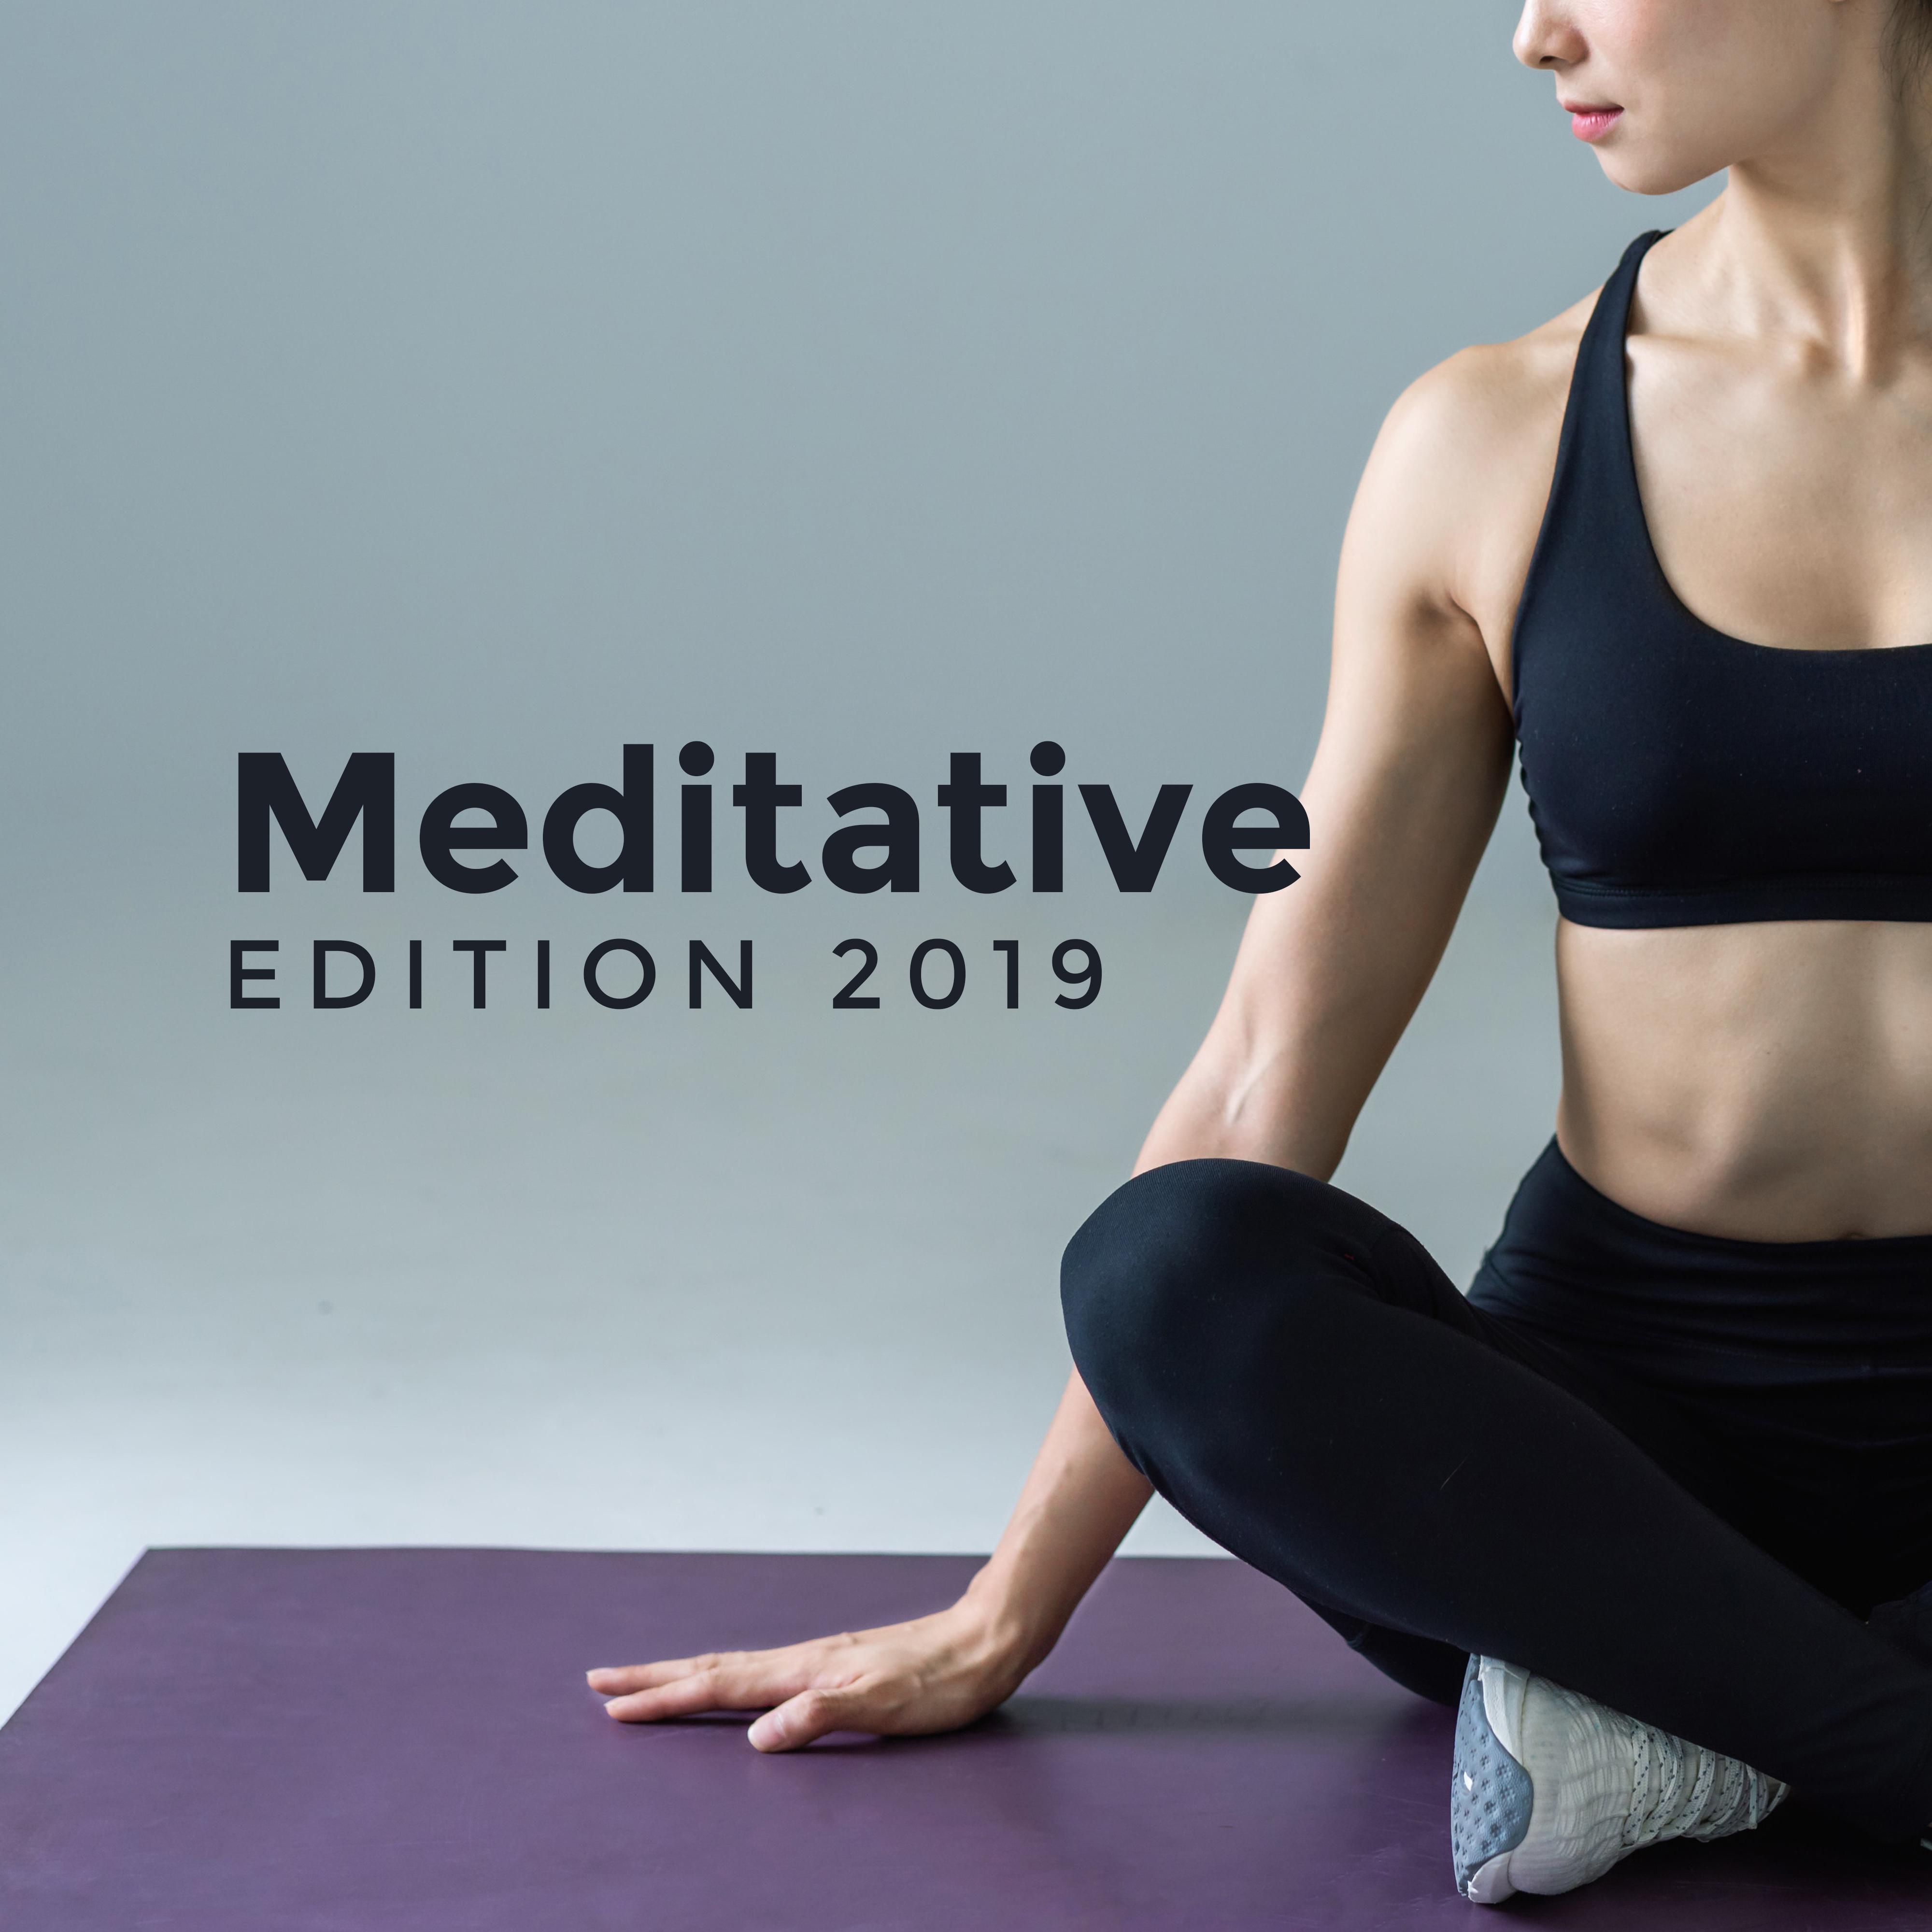 Meditative Edition 2019: Yoga Practice, Harmony Zen Lounge, Meditation Journey, Spiritual Sounds for Relaxation, Pure Relaxing Meditation, Ambient Music 2019